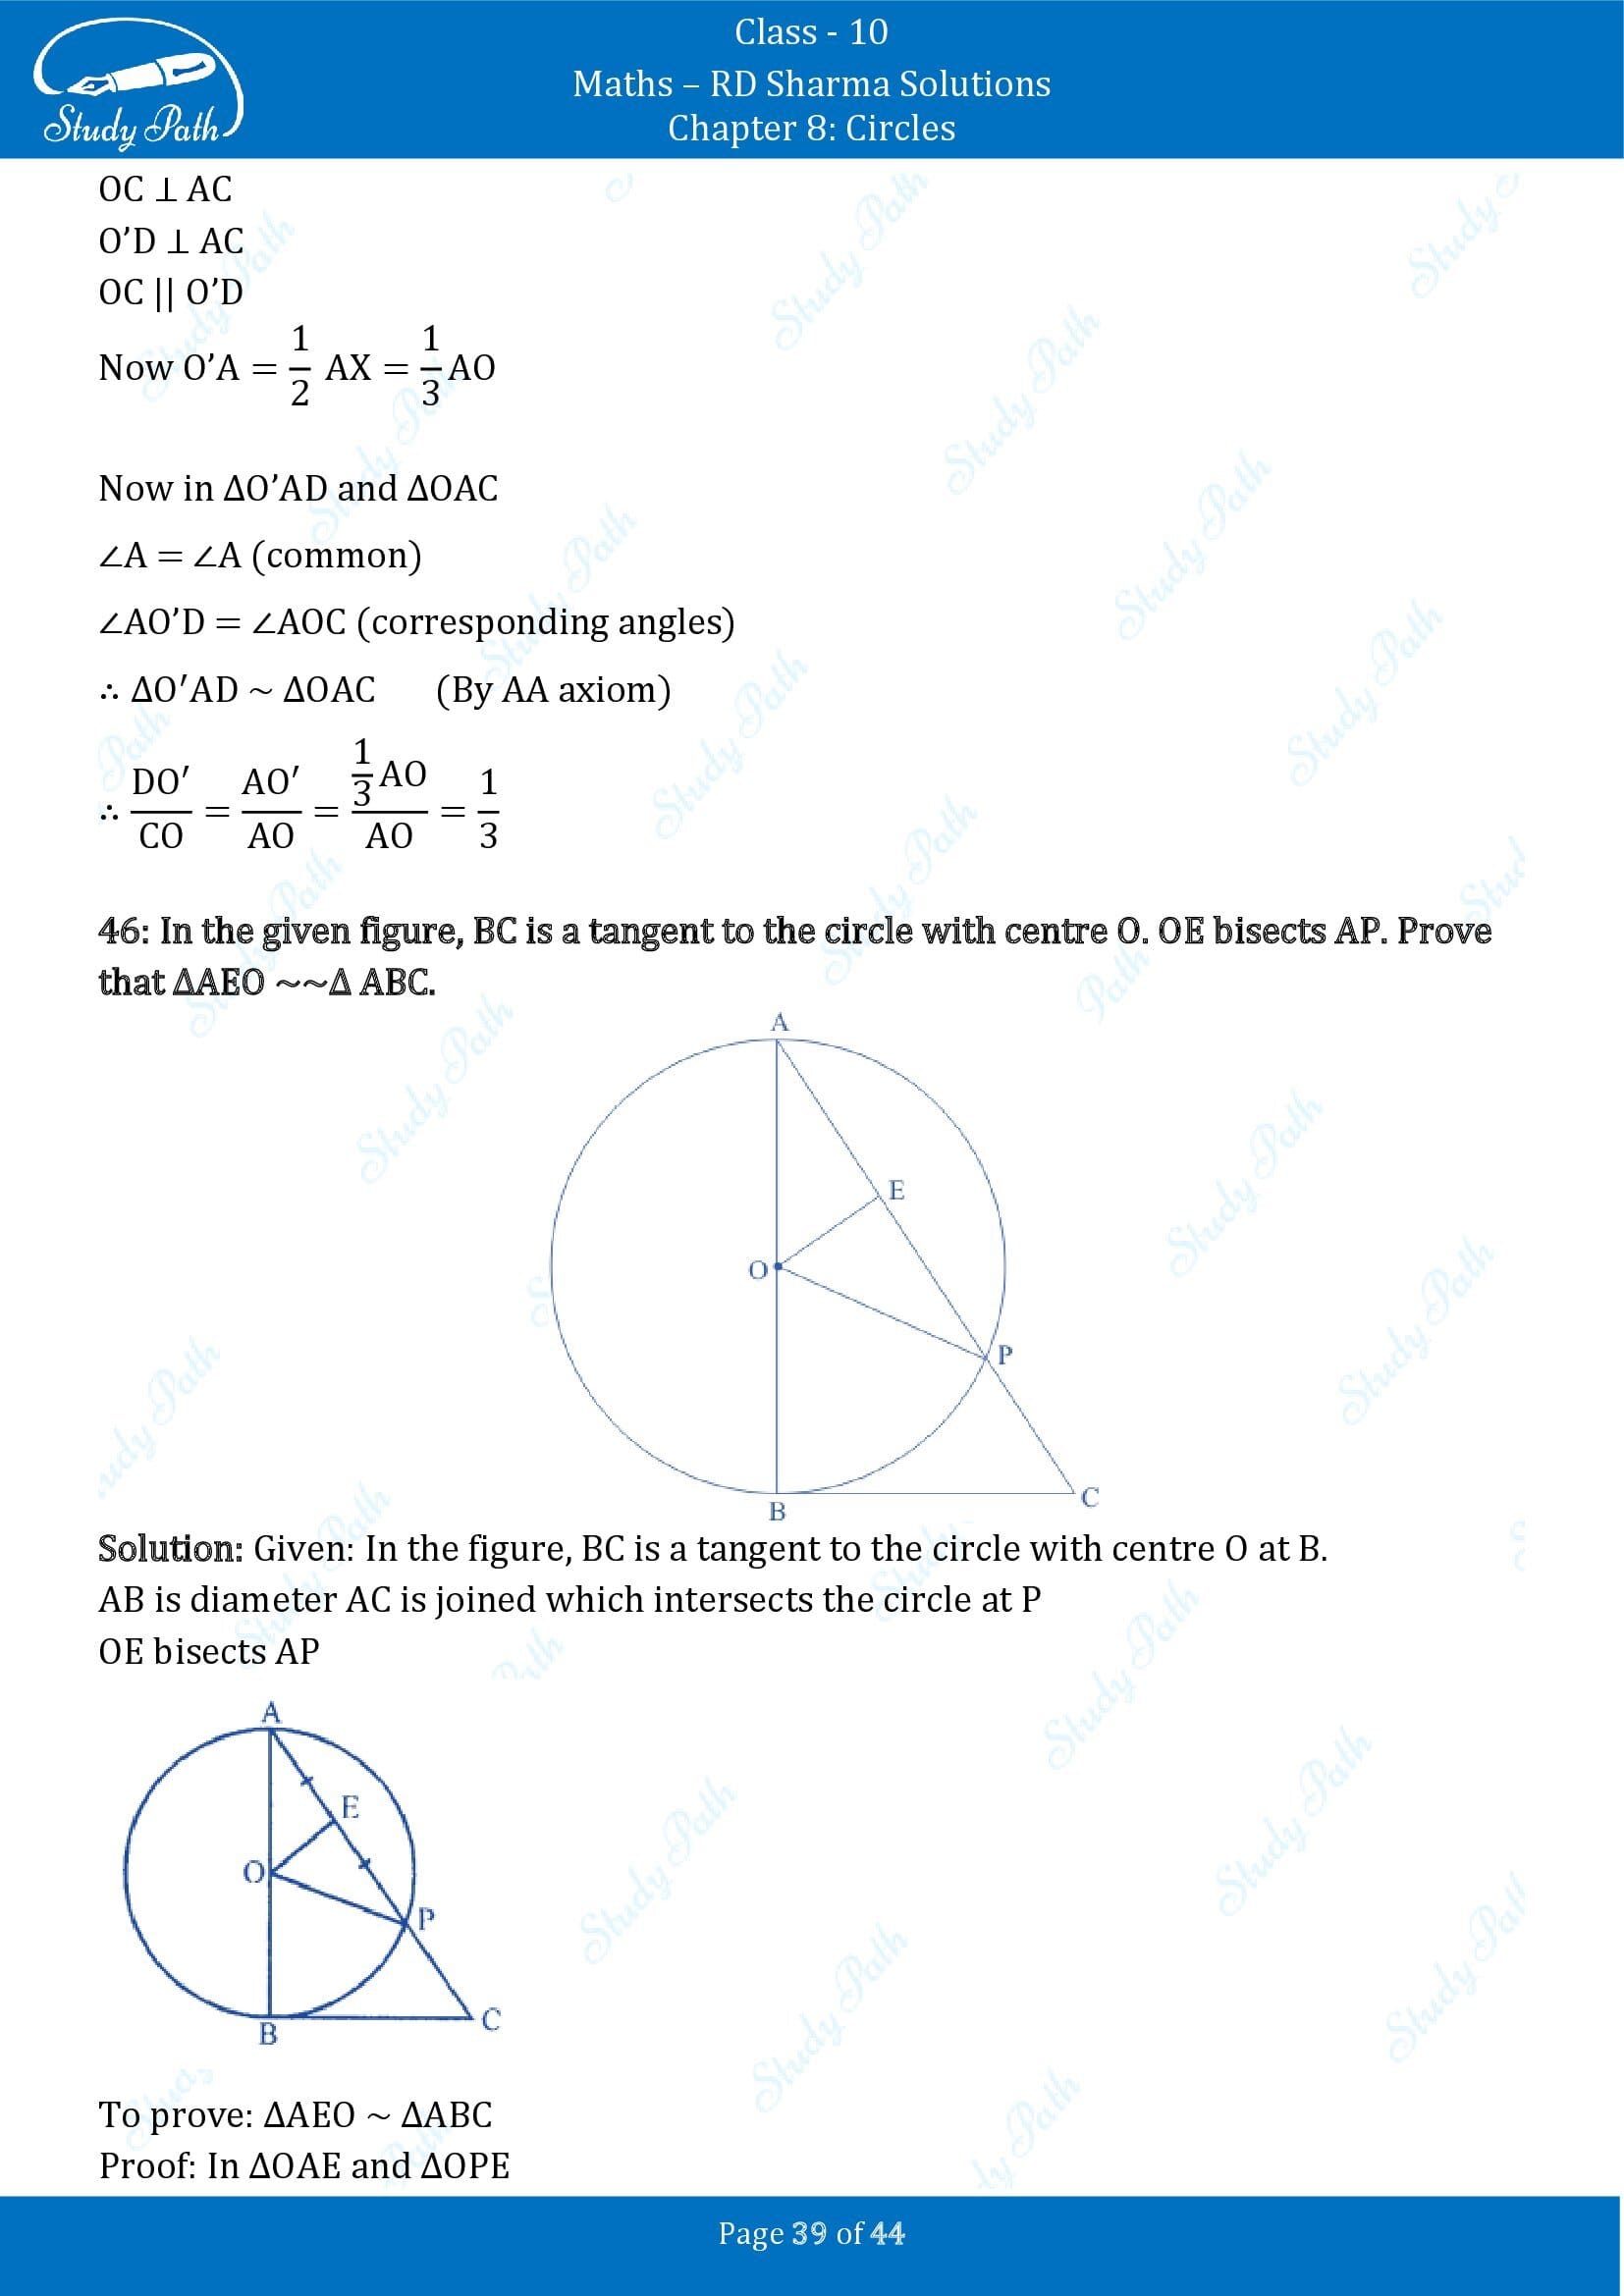 RD Sharma Solutions Class 10 Chapter 8 Circles Exercise 8.2 00039